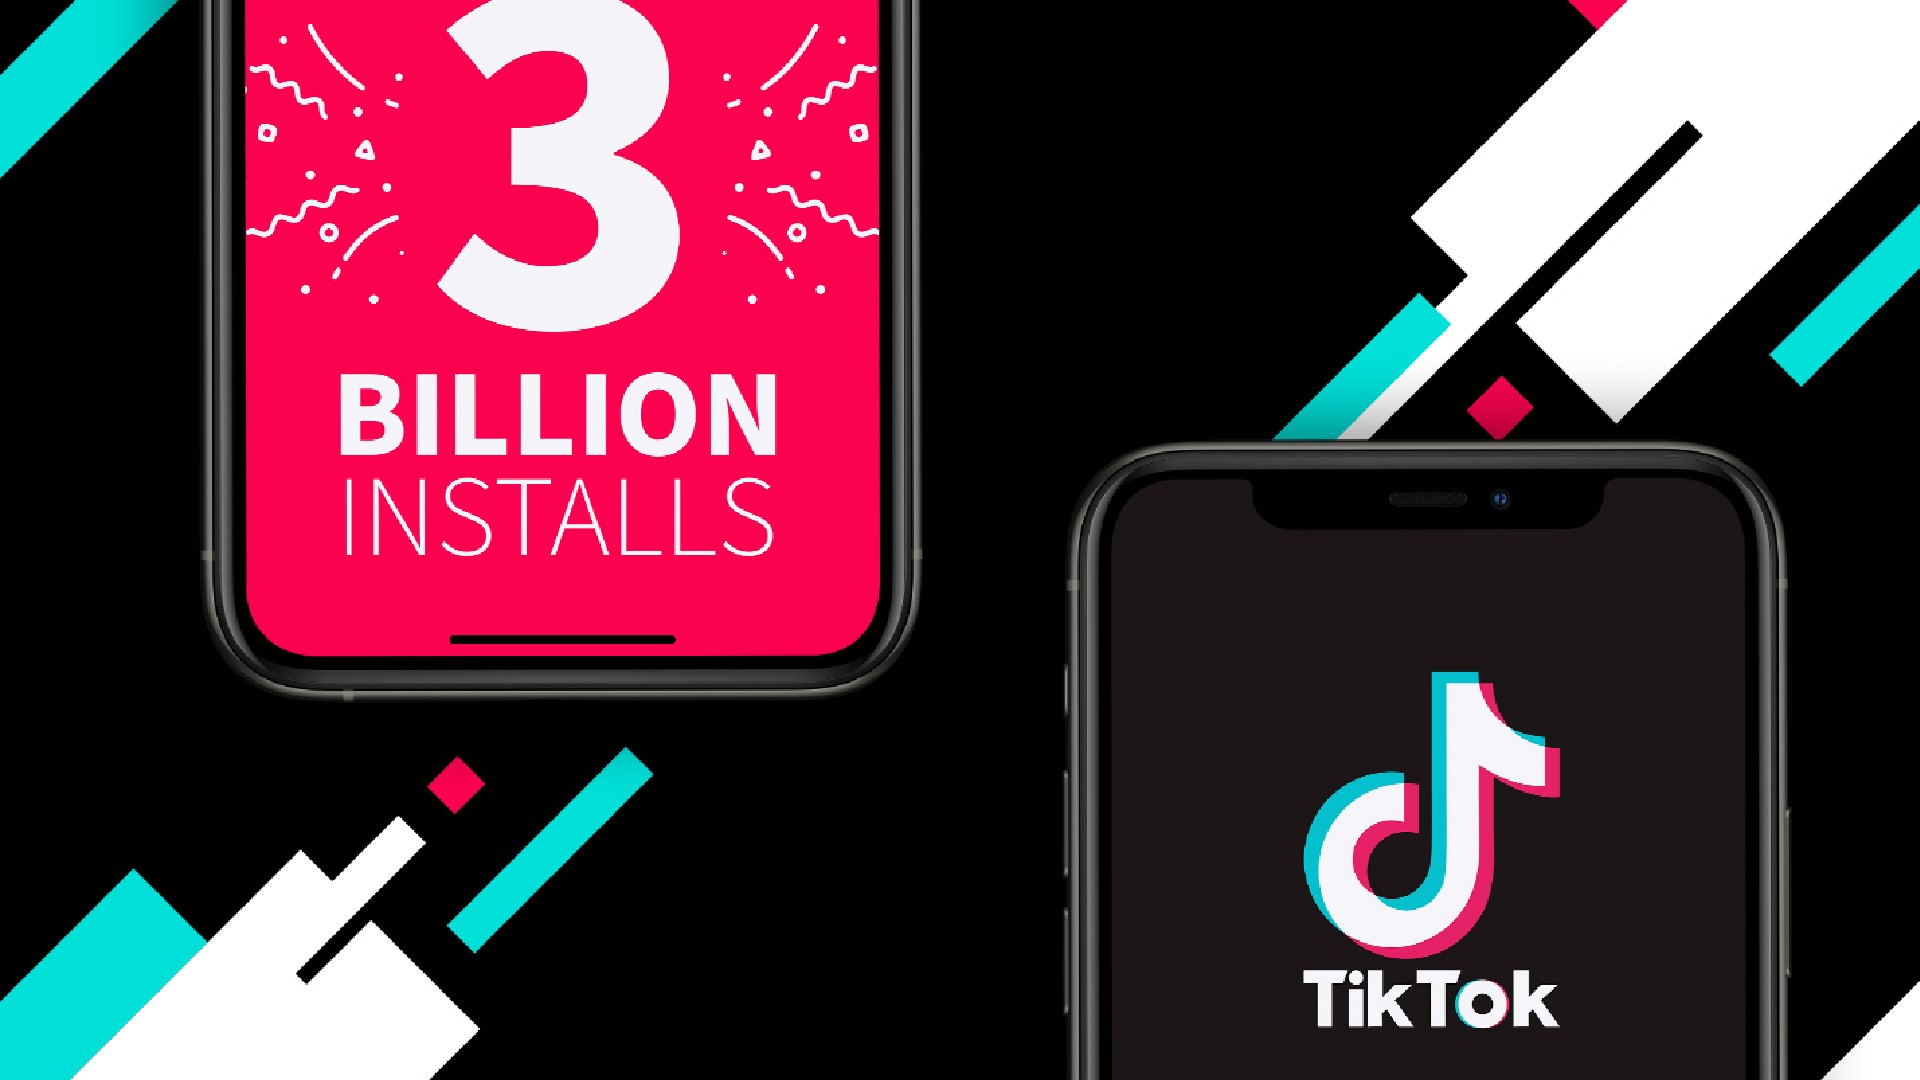 First Time TikTok Becomes Non-Facebook Owned App to Reach 3 Billion Installs